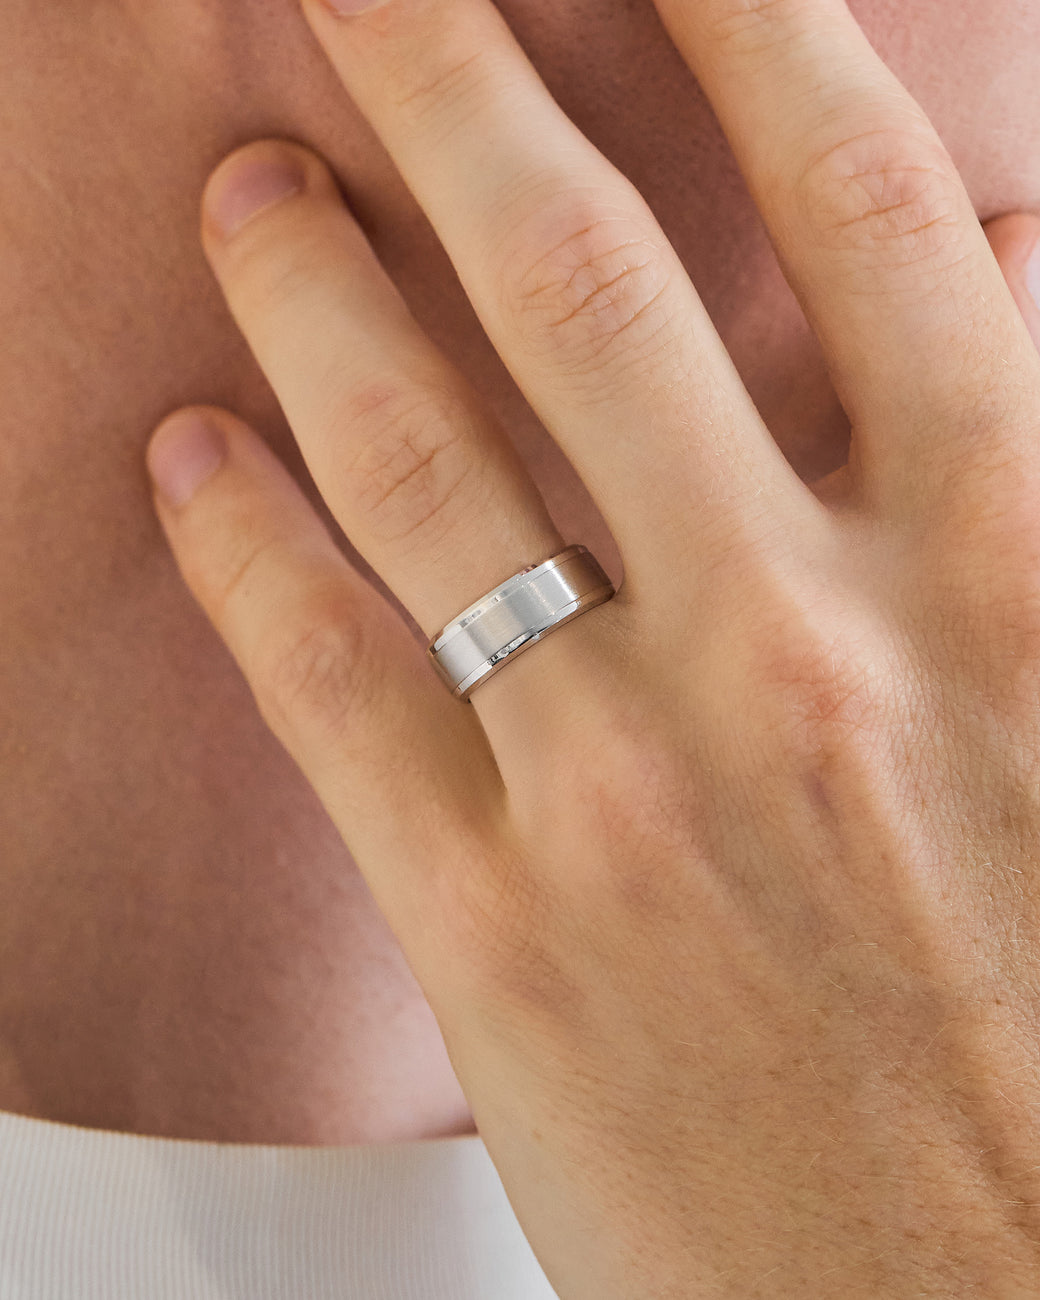 Photograph of your ring